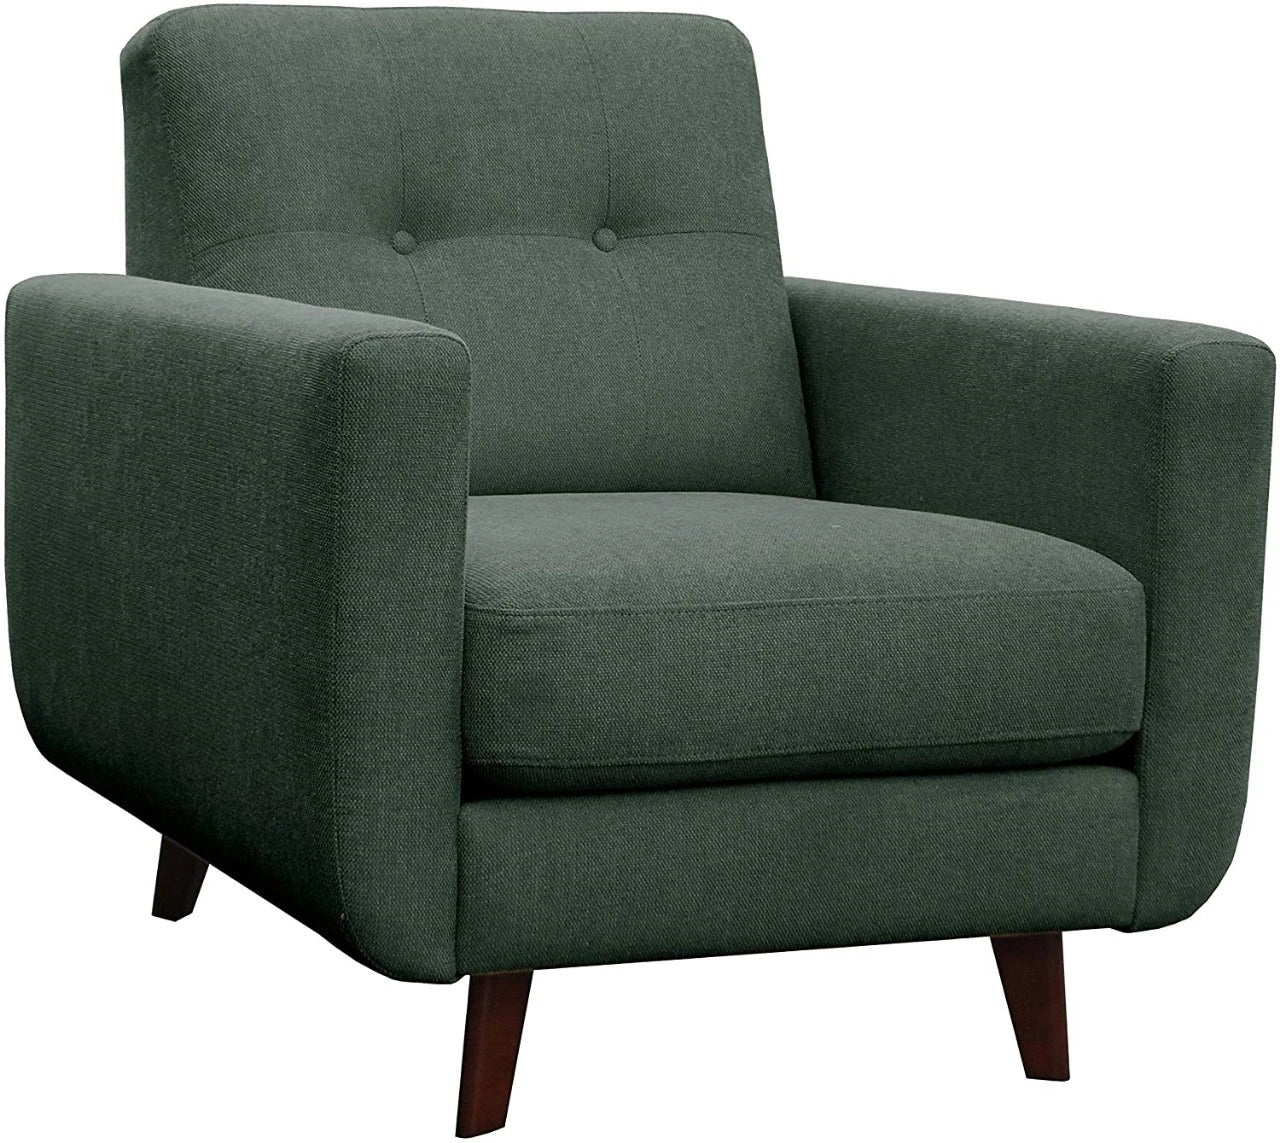 Sofa Chair : Storm Grey Armchair with Tapered Legs